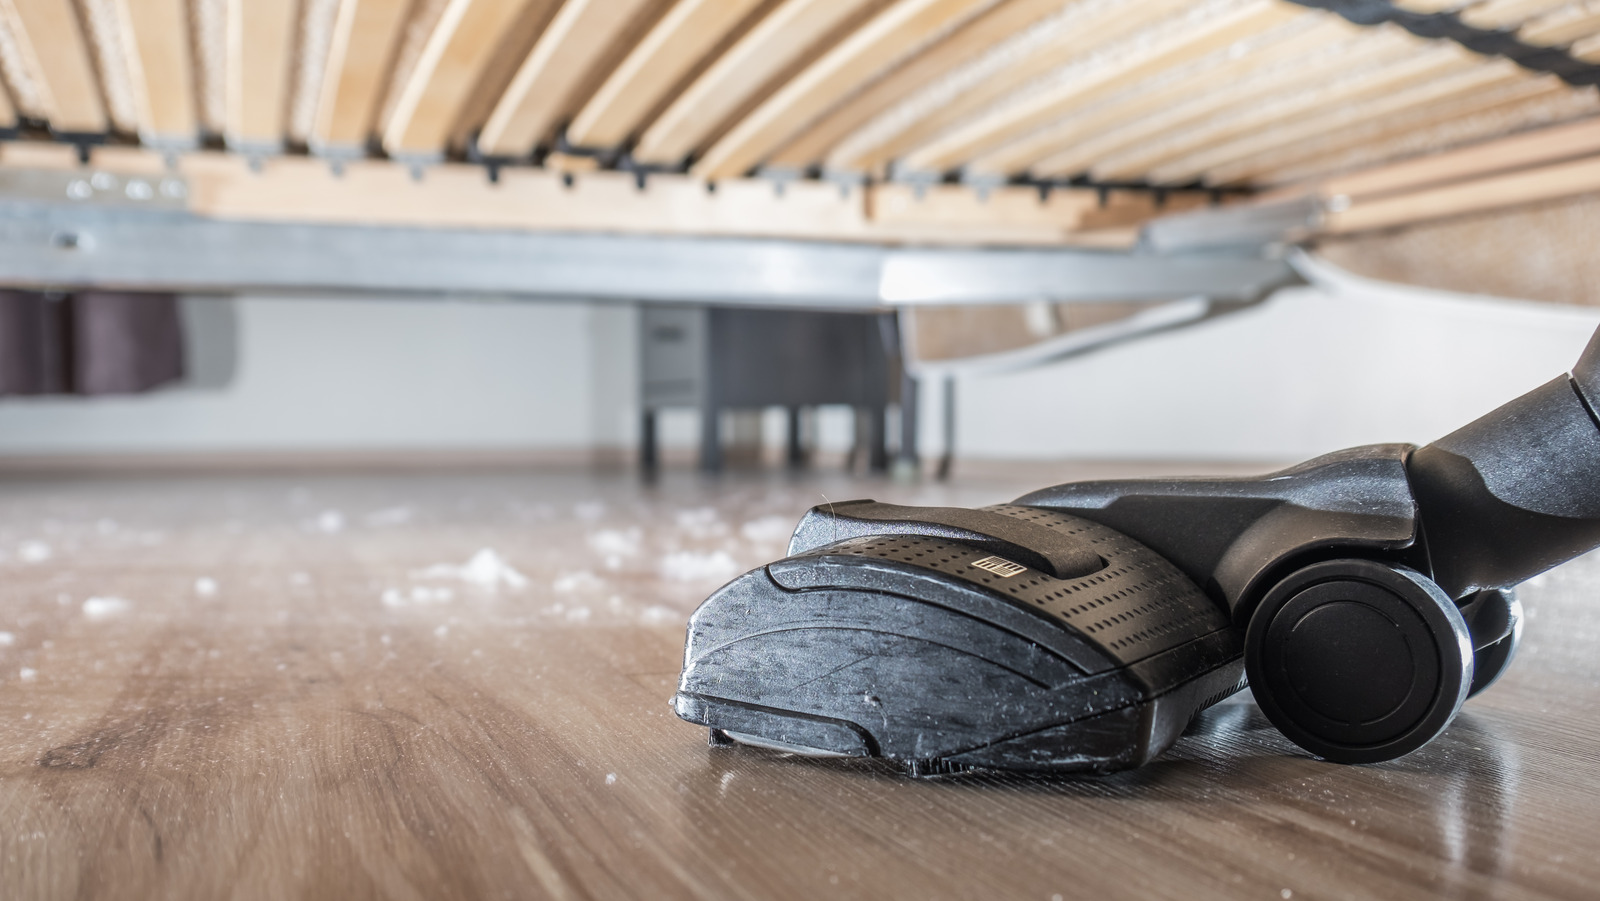 https://www.housedigest.com/img/gallery/4-tips-for-preventing-dust-buildup-under-the-bed/l-intro-1664987750.jpg